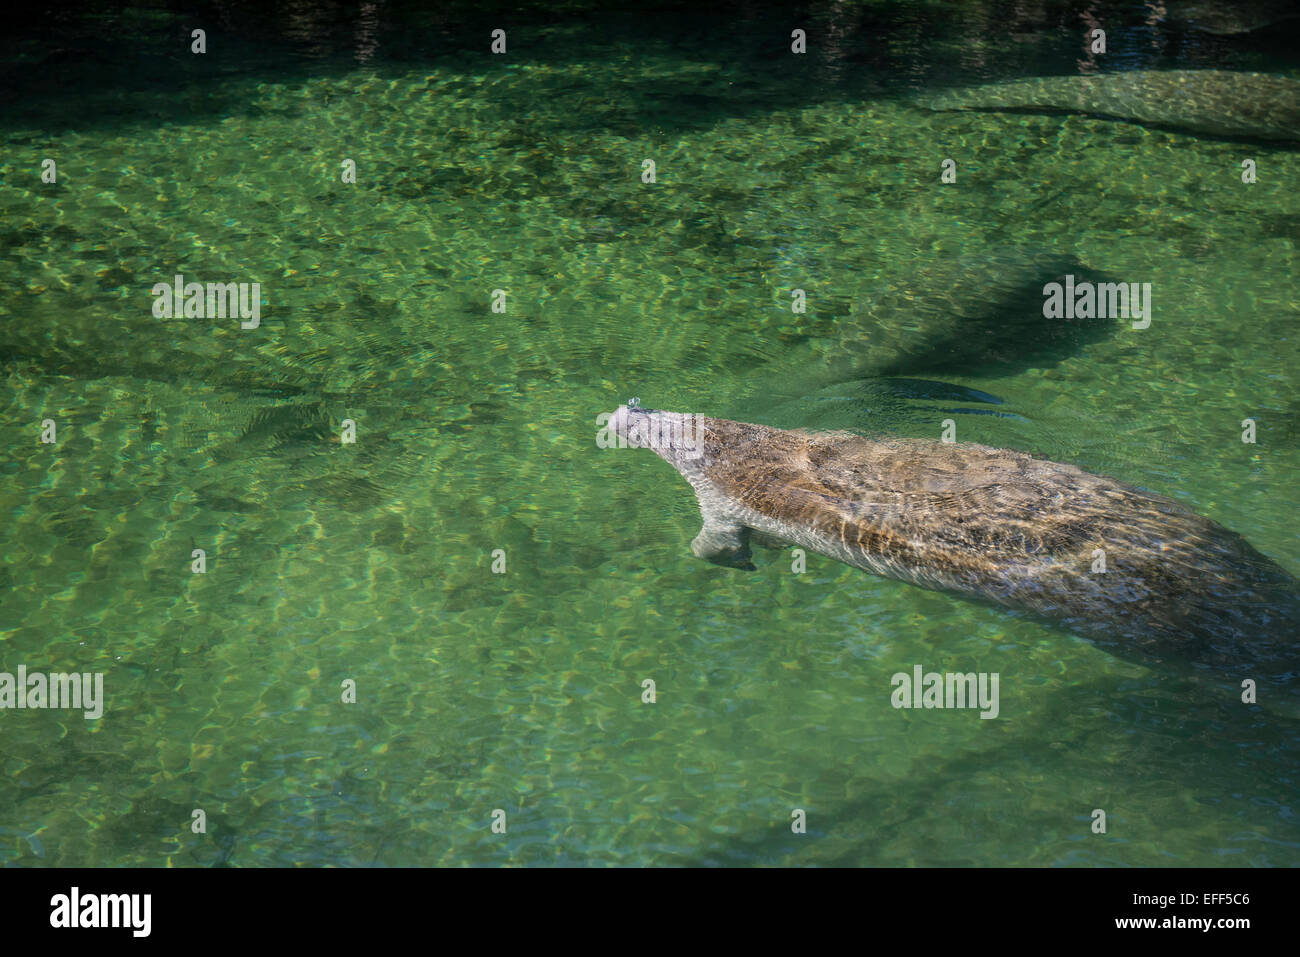 Wild West Indian Manatee blowing bubbles as it surfaces to take a breath as it winters in the warm clear waters of Blue Spring State Park, Florida. Stock Photo